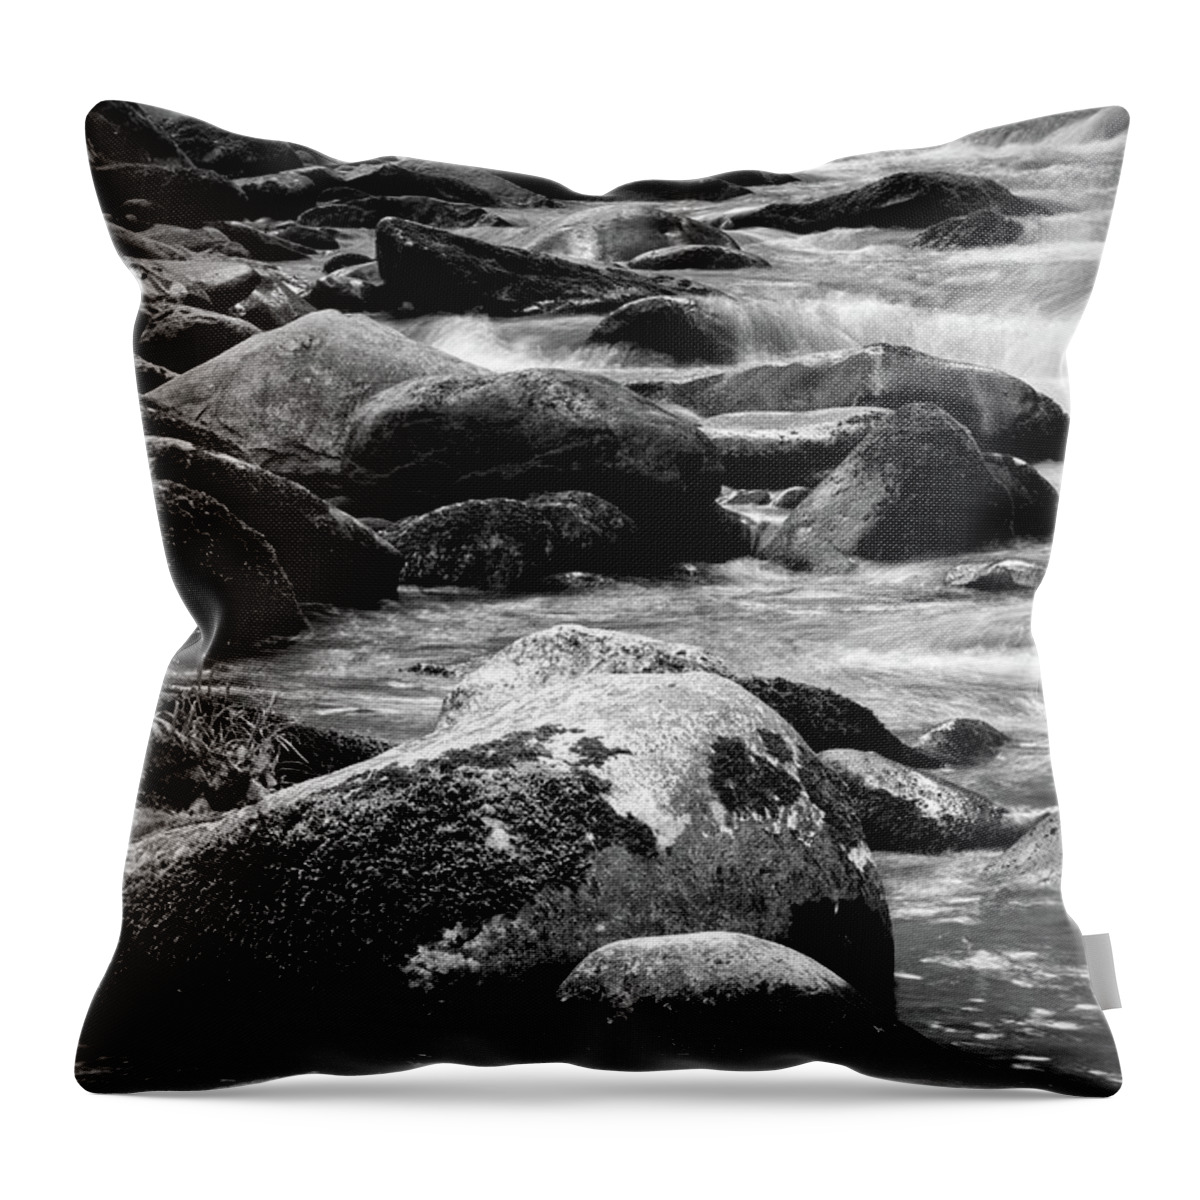 Middle Prong Trail Throw Pillow featuring the photograph Middle Prong Little River 7 by Phil Perkins